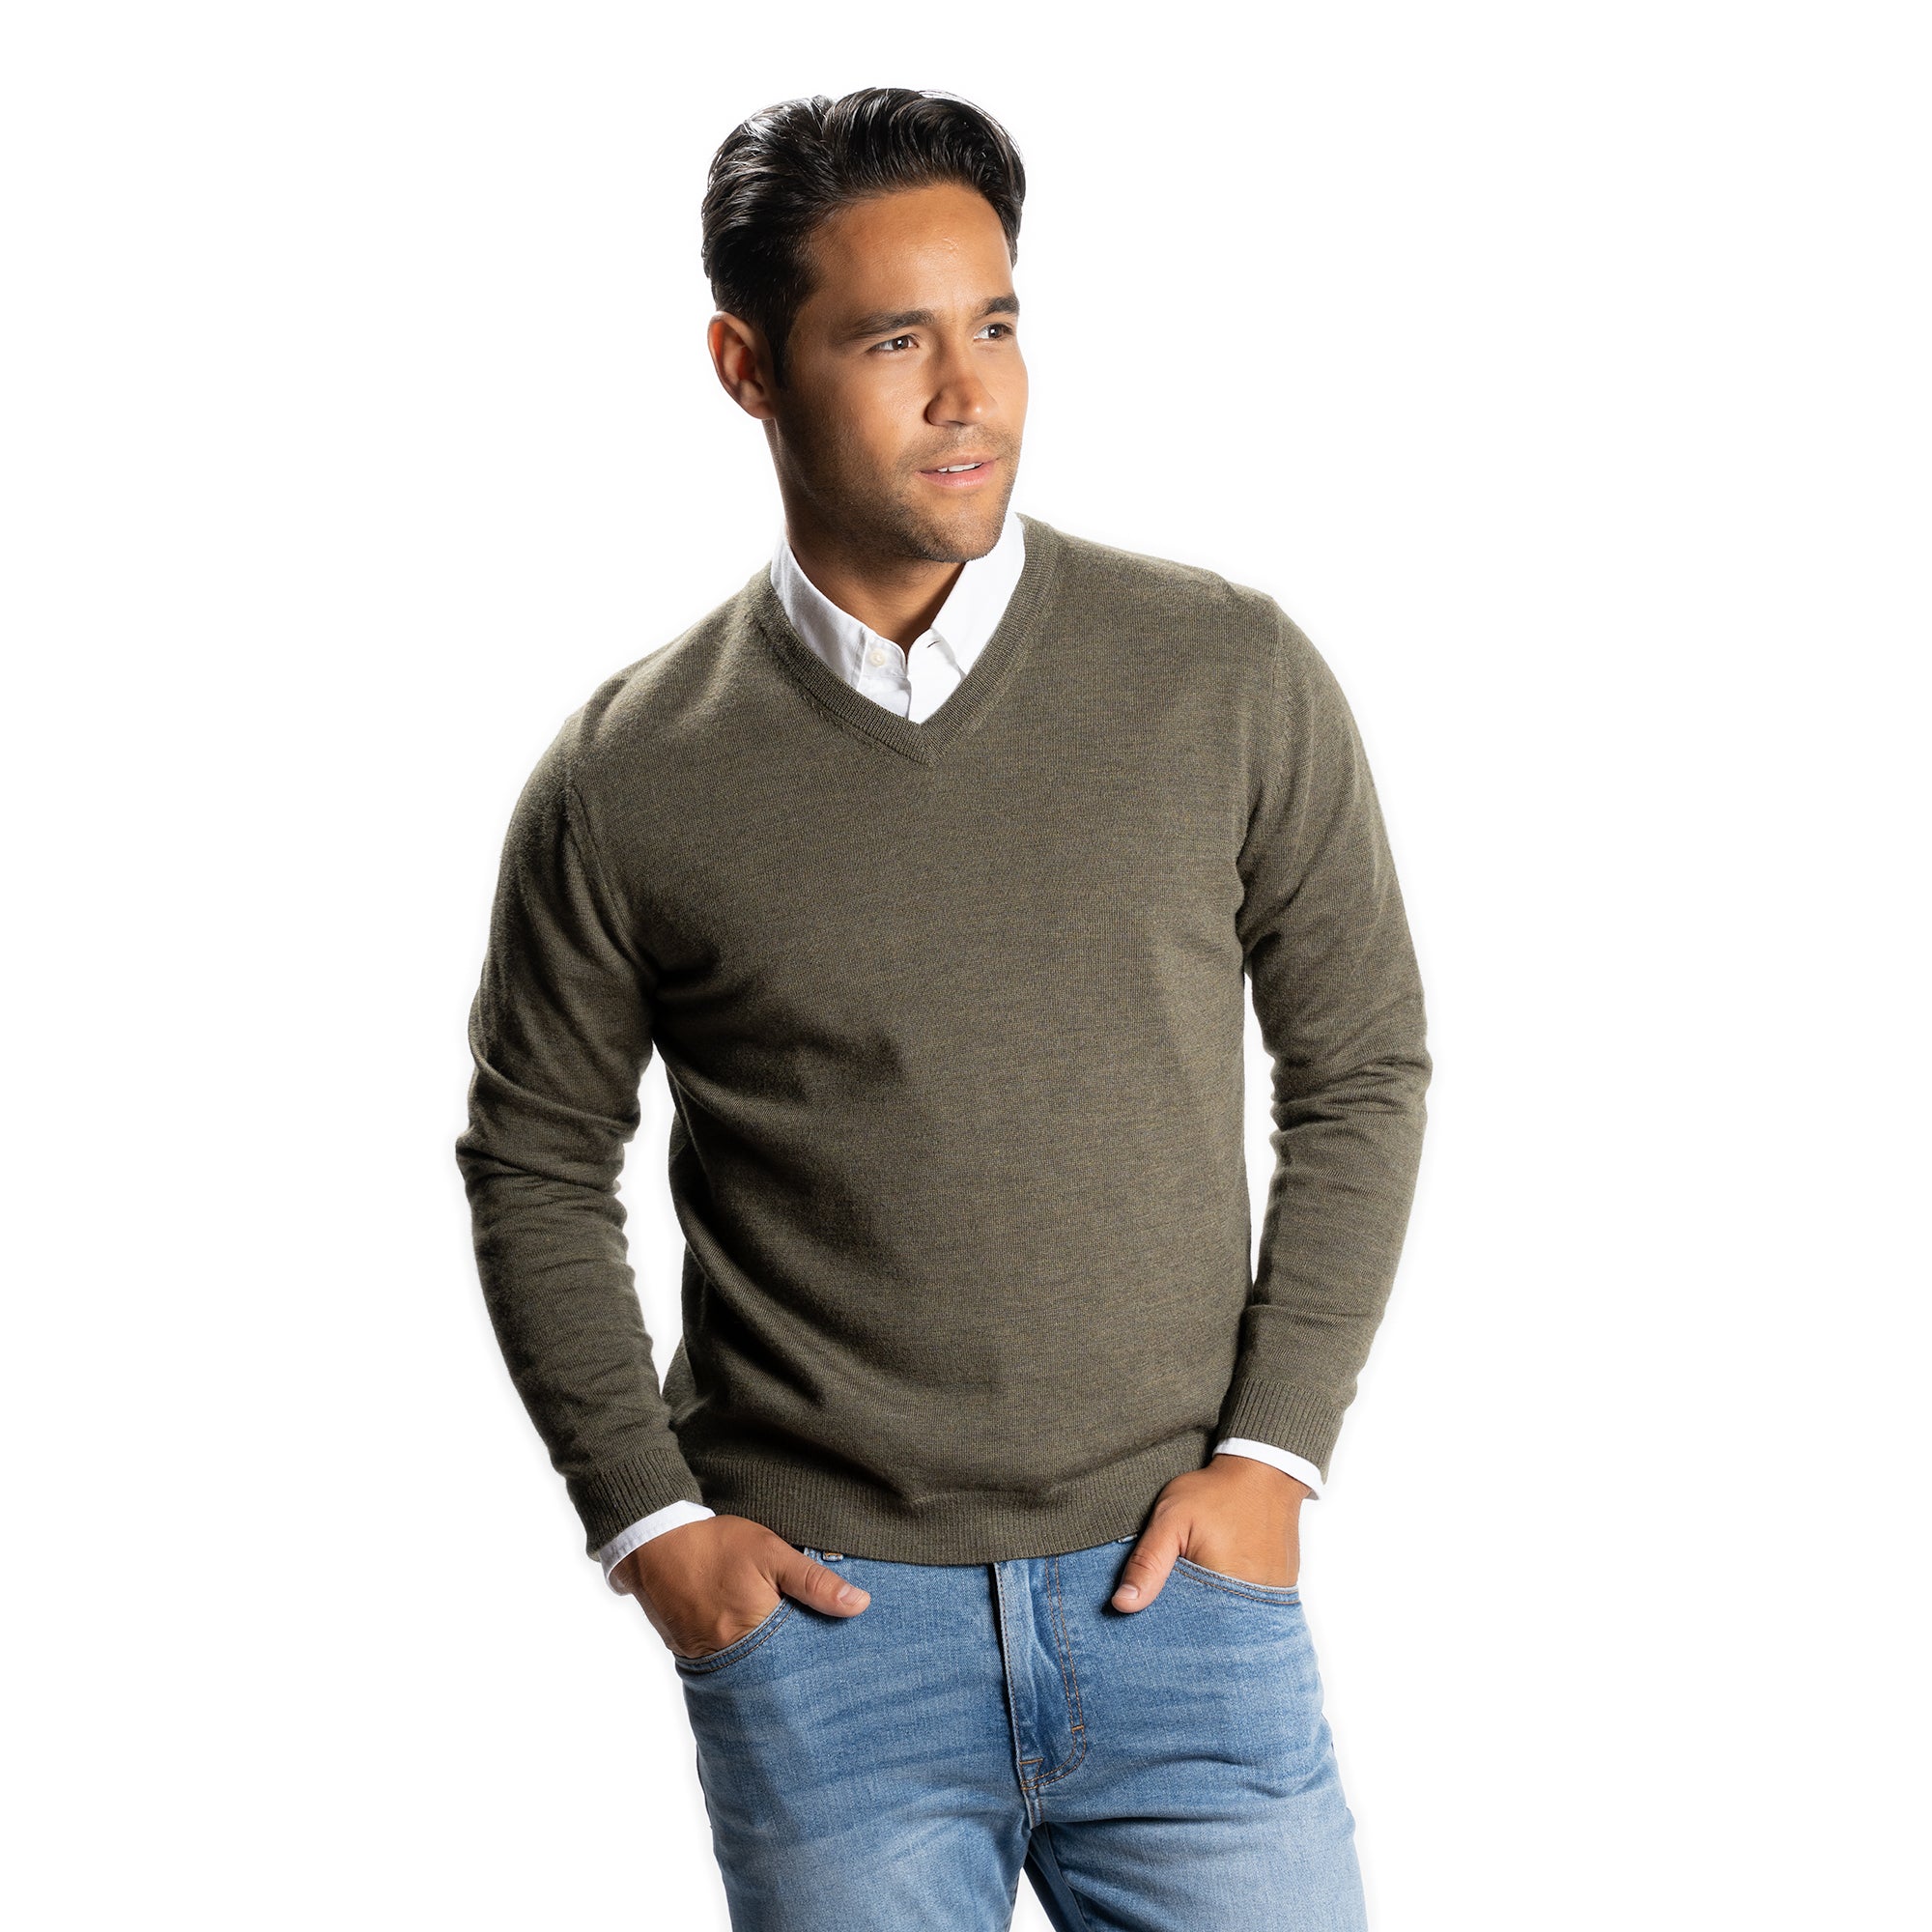 V-neck Wool & Cashmere Sweater